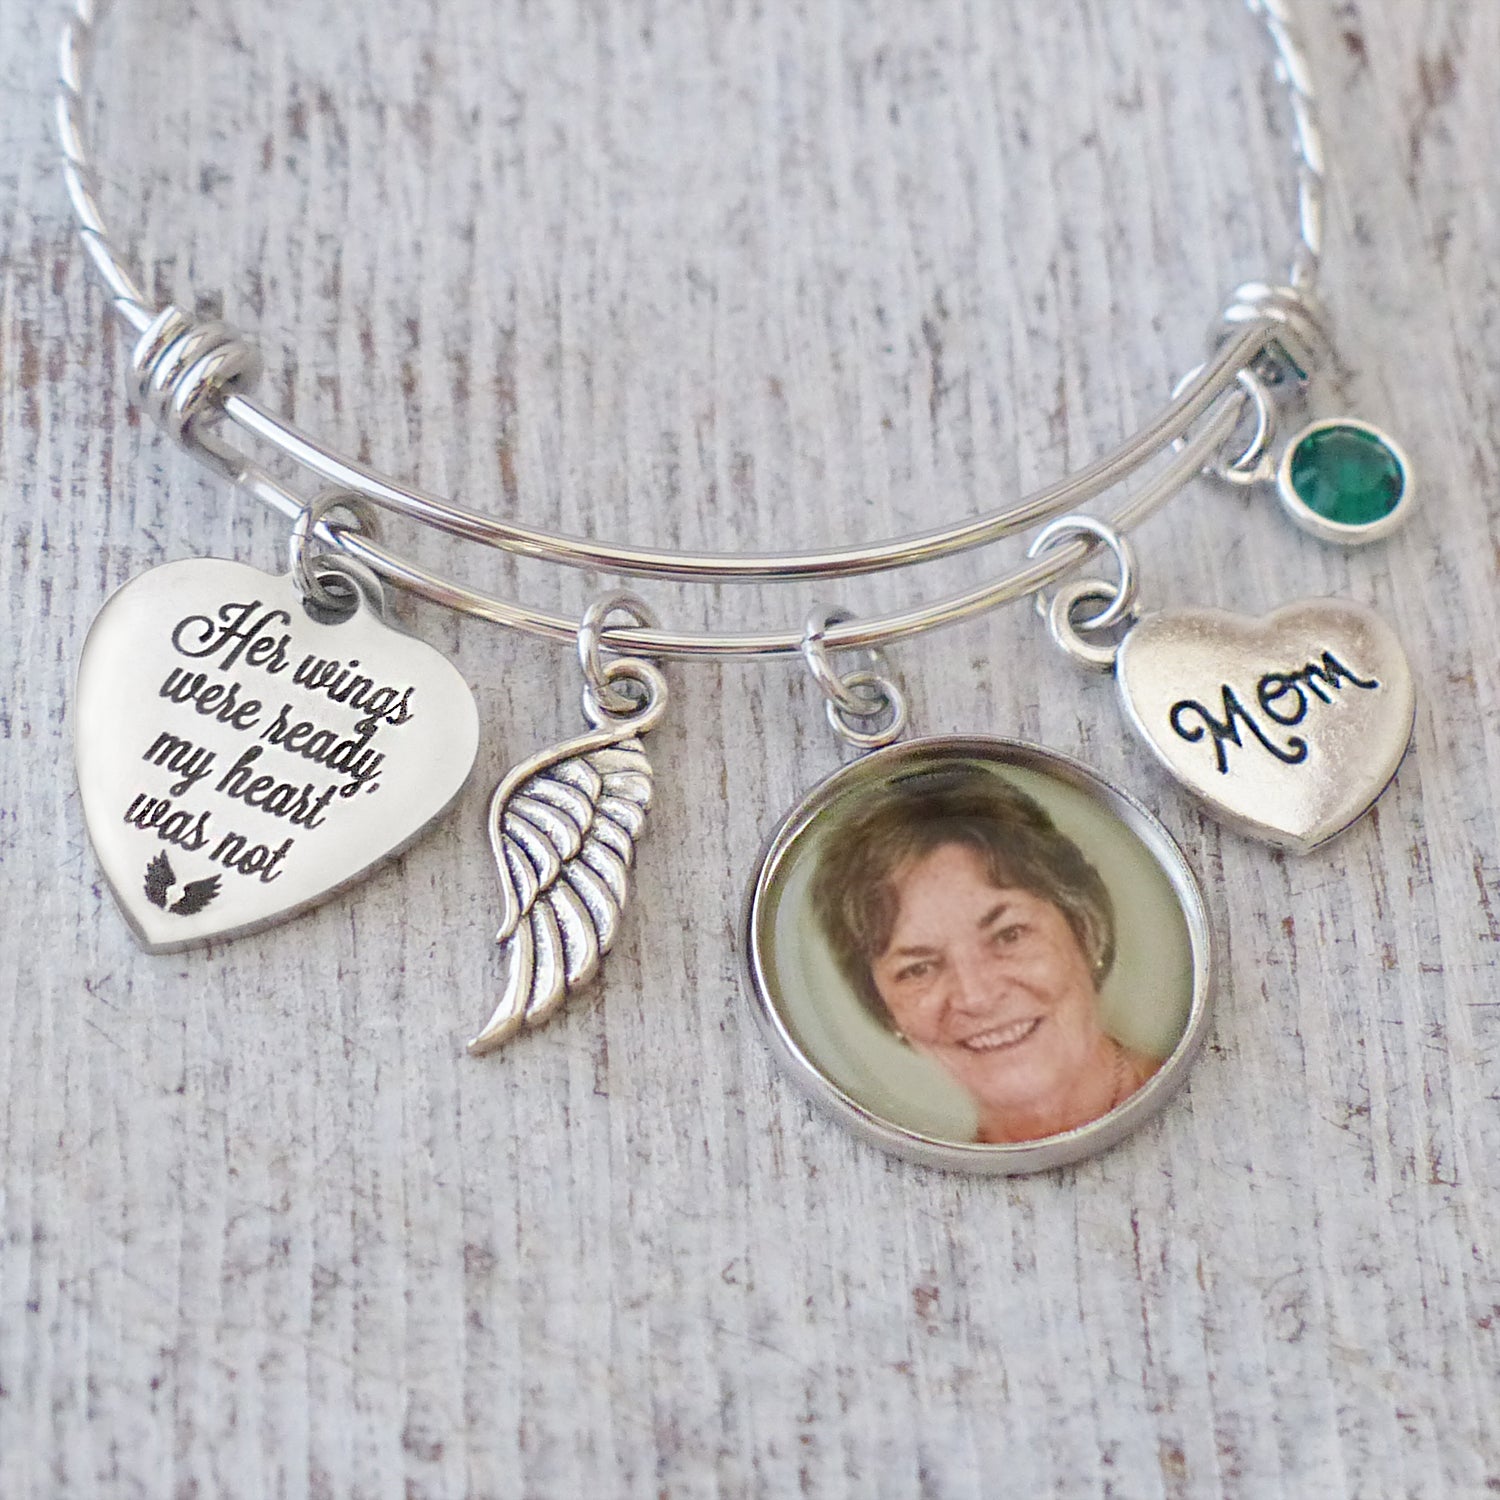 loss of mother bereavement gift for her-bangle bracelet with her wings were ready my heart was not charm and custom photo pendant-includes angel wing charm, mom charm and custom birthstone charm